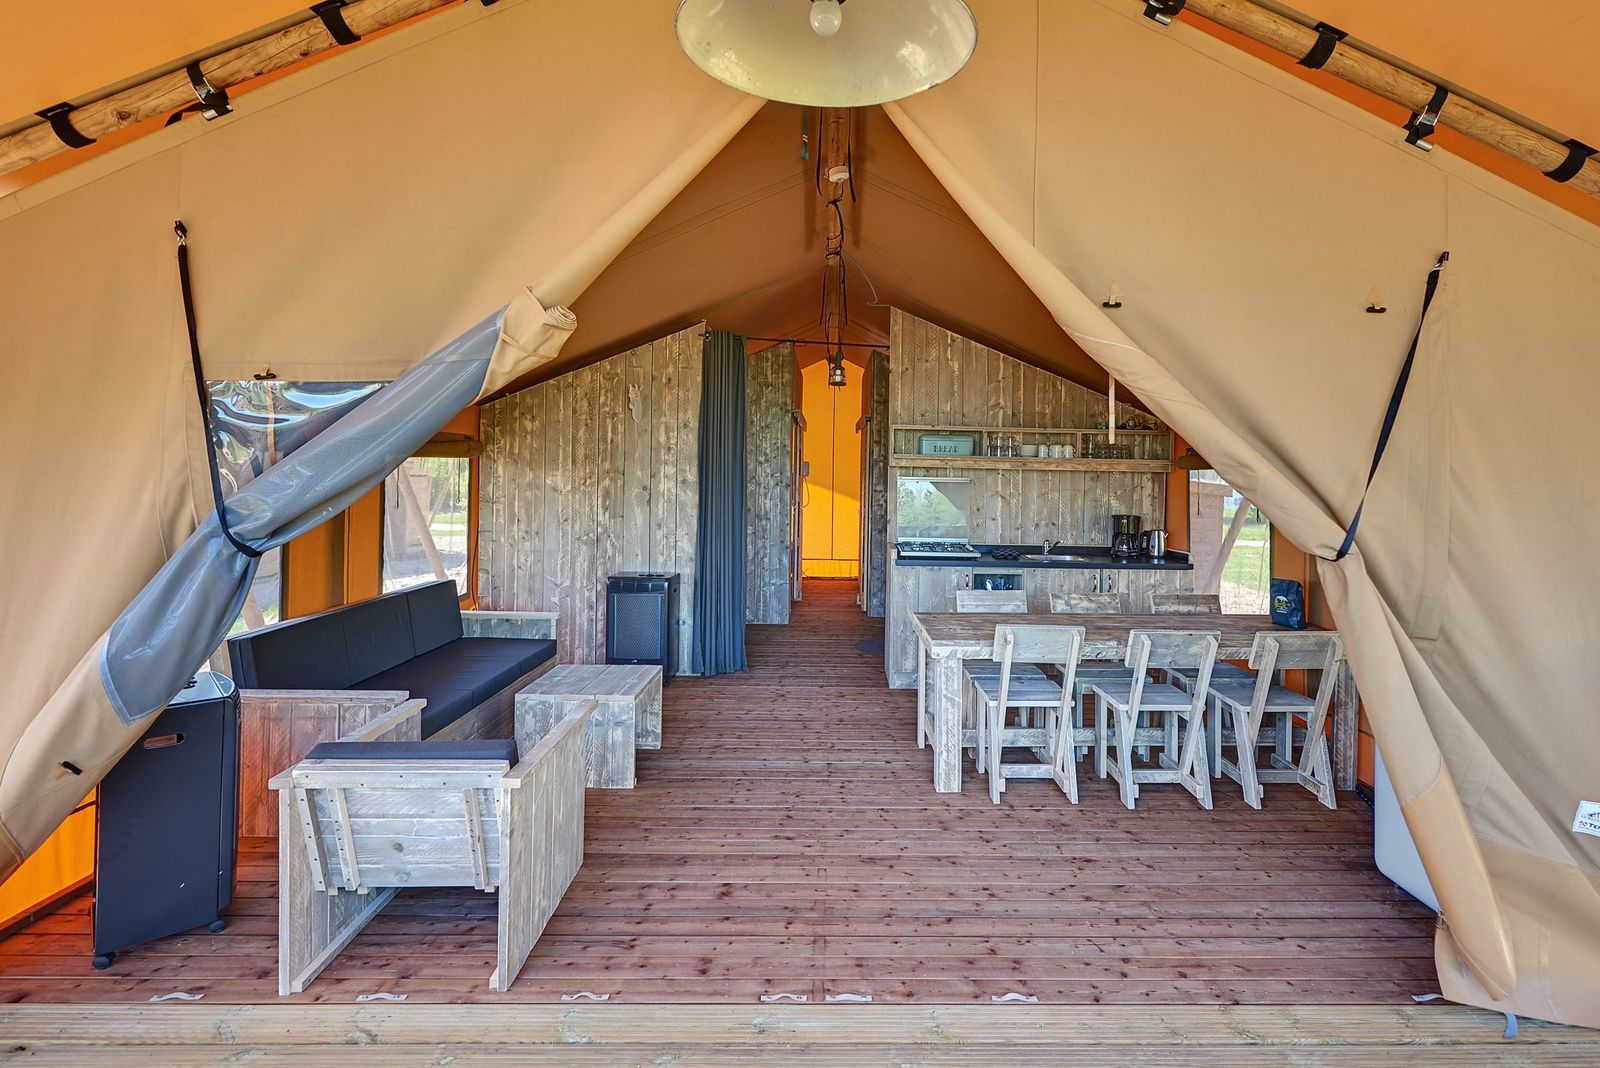 6-person glamping tent